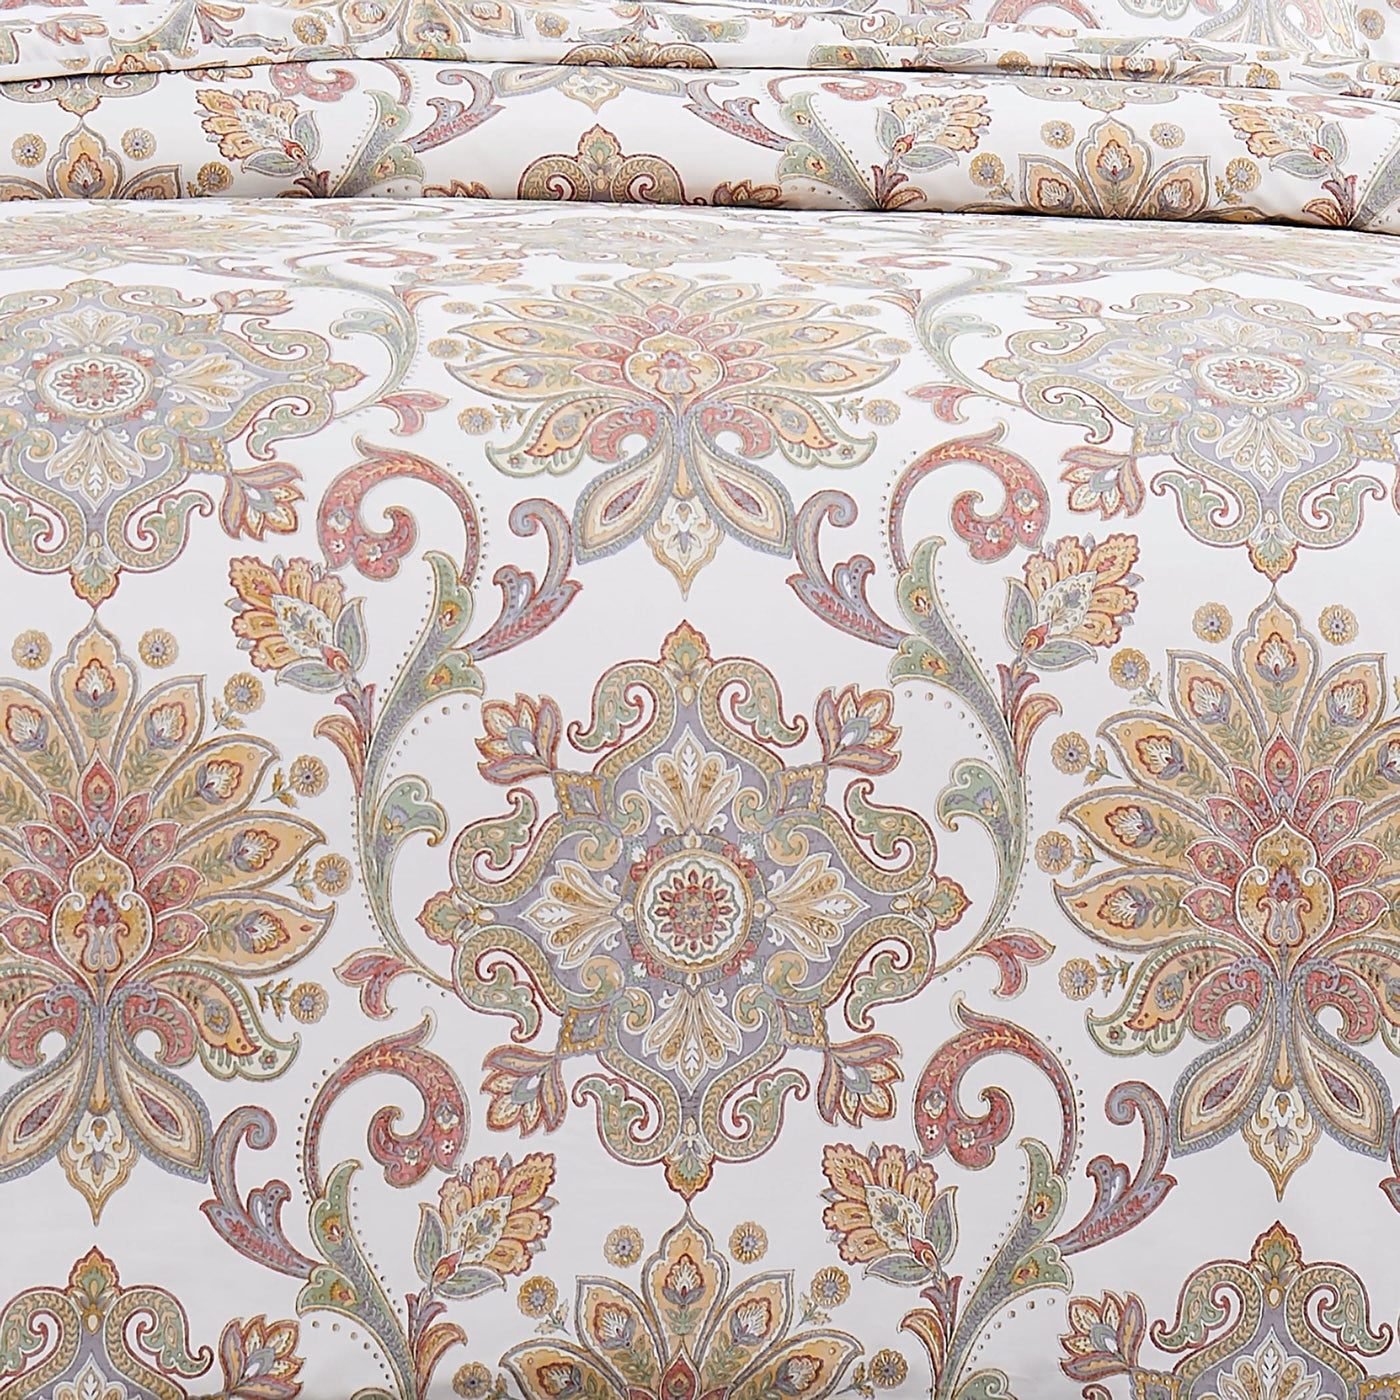 Details and Print Pattern of Serenity Duvet Cover Set in Red#color_serenity-red